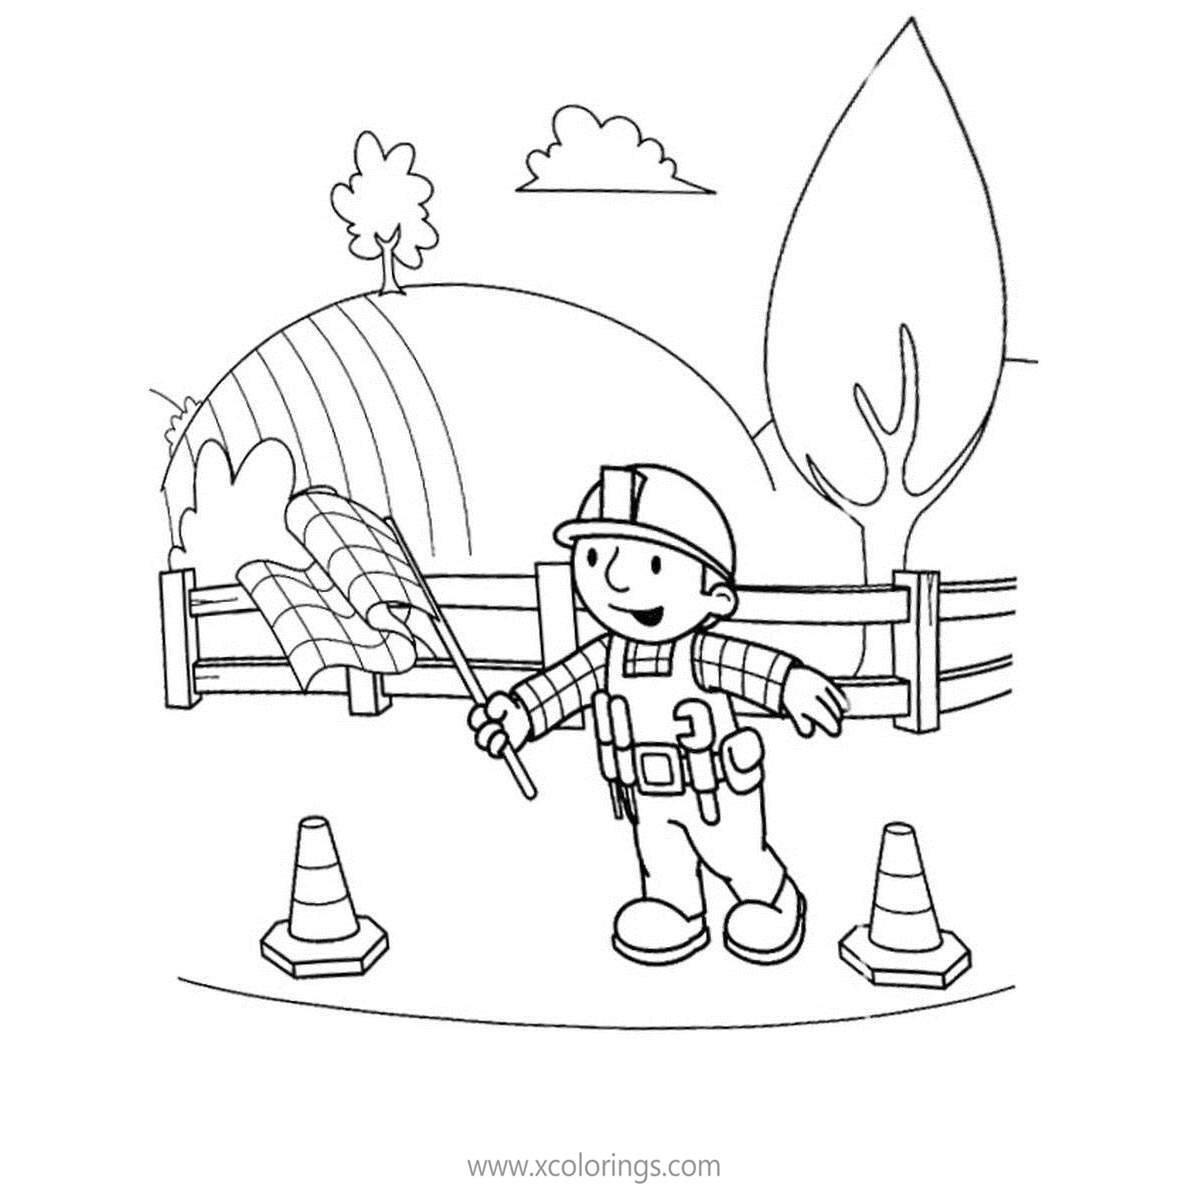 Free Bob The Builder Coloring Pages Bob with Flag printable